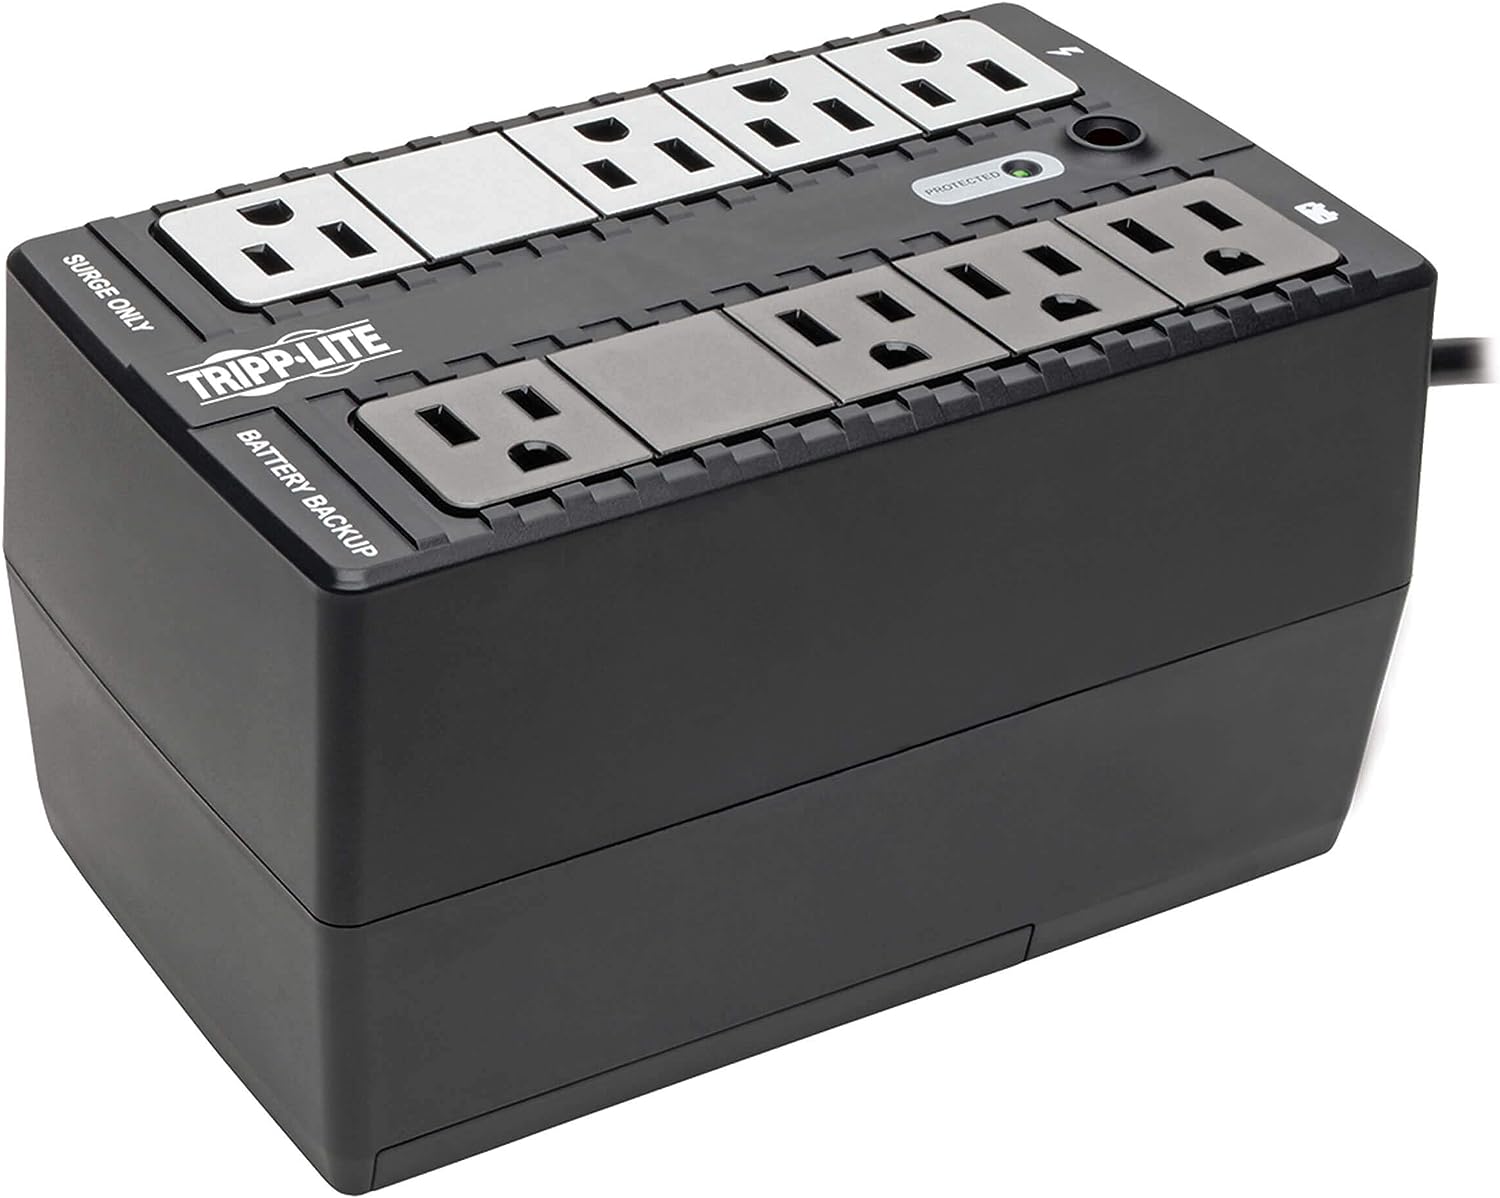 What Is A Power Surge Protector